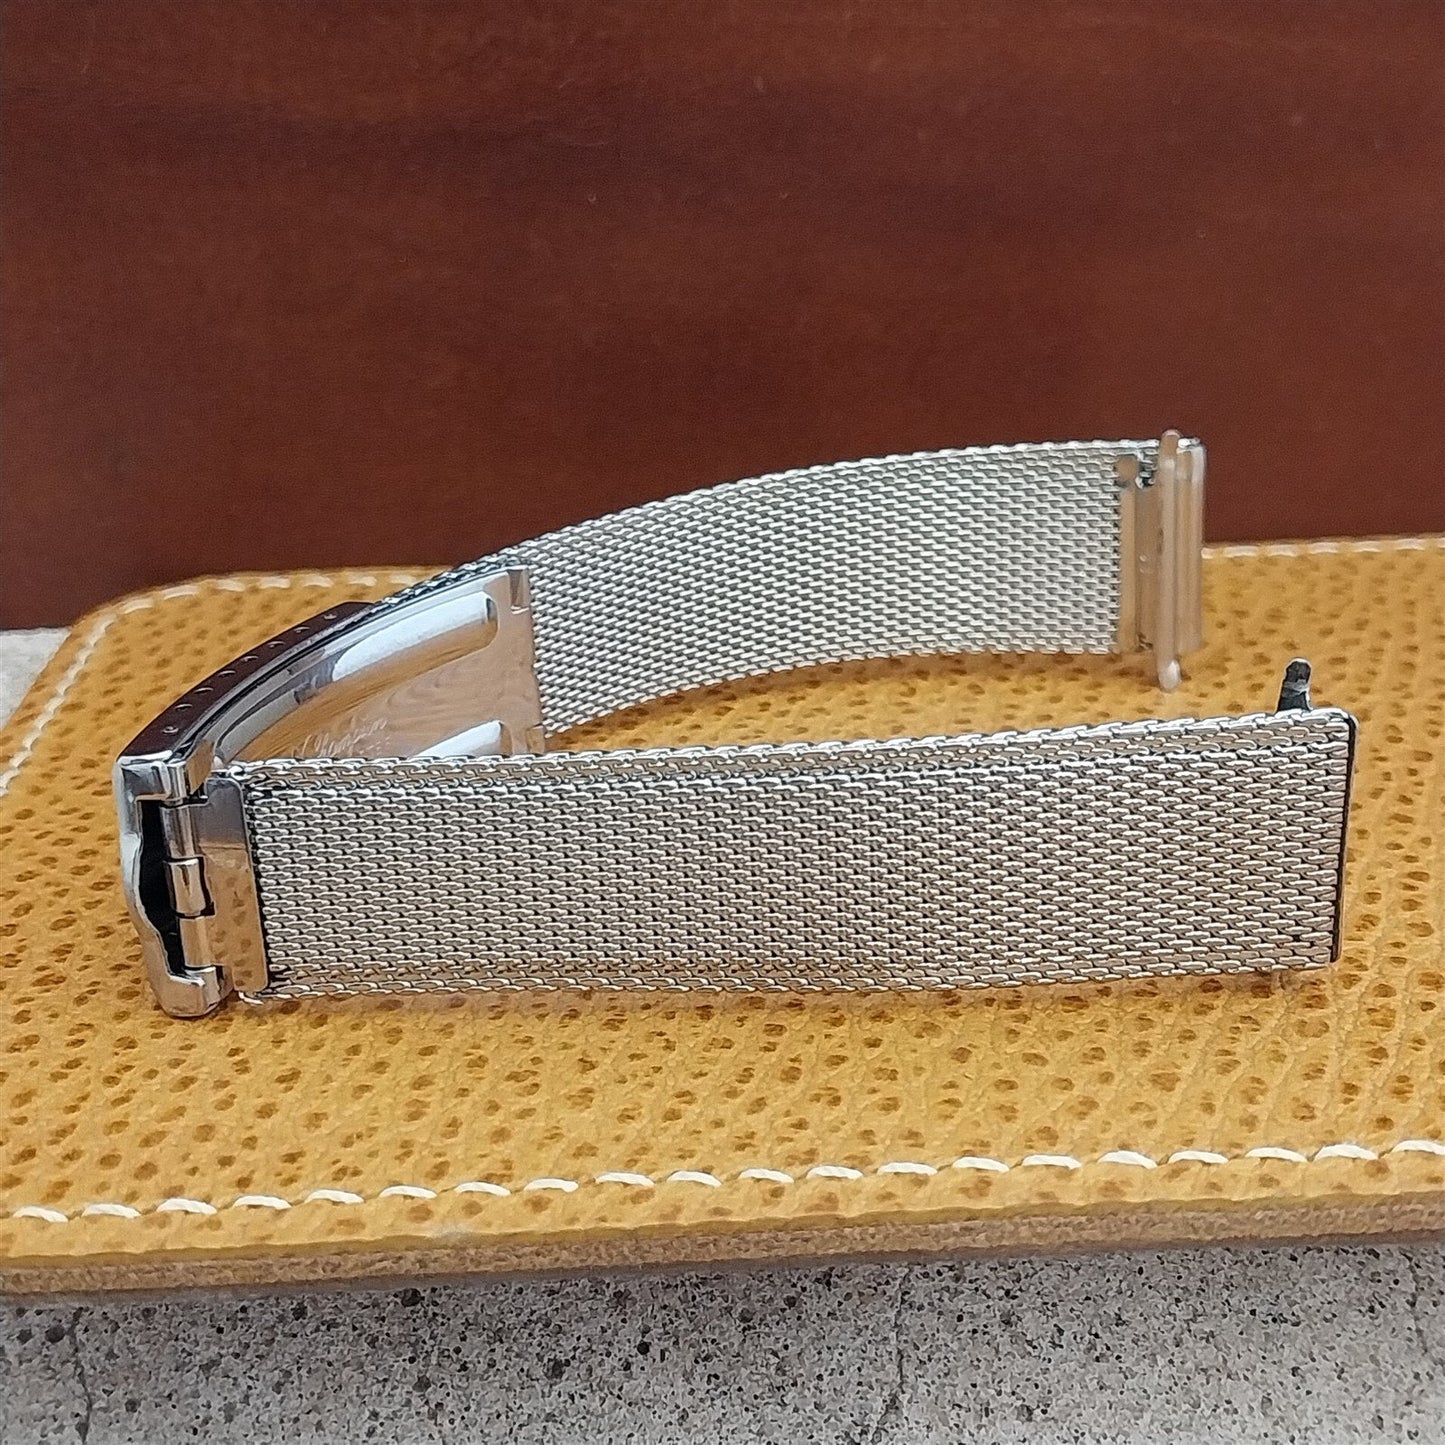 18mm flat-end Stainless Steel Mesh JB Champion 1960s nos Vintage Watch Band